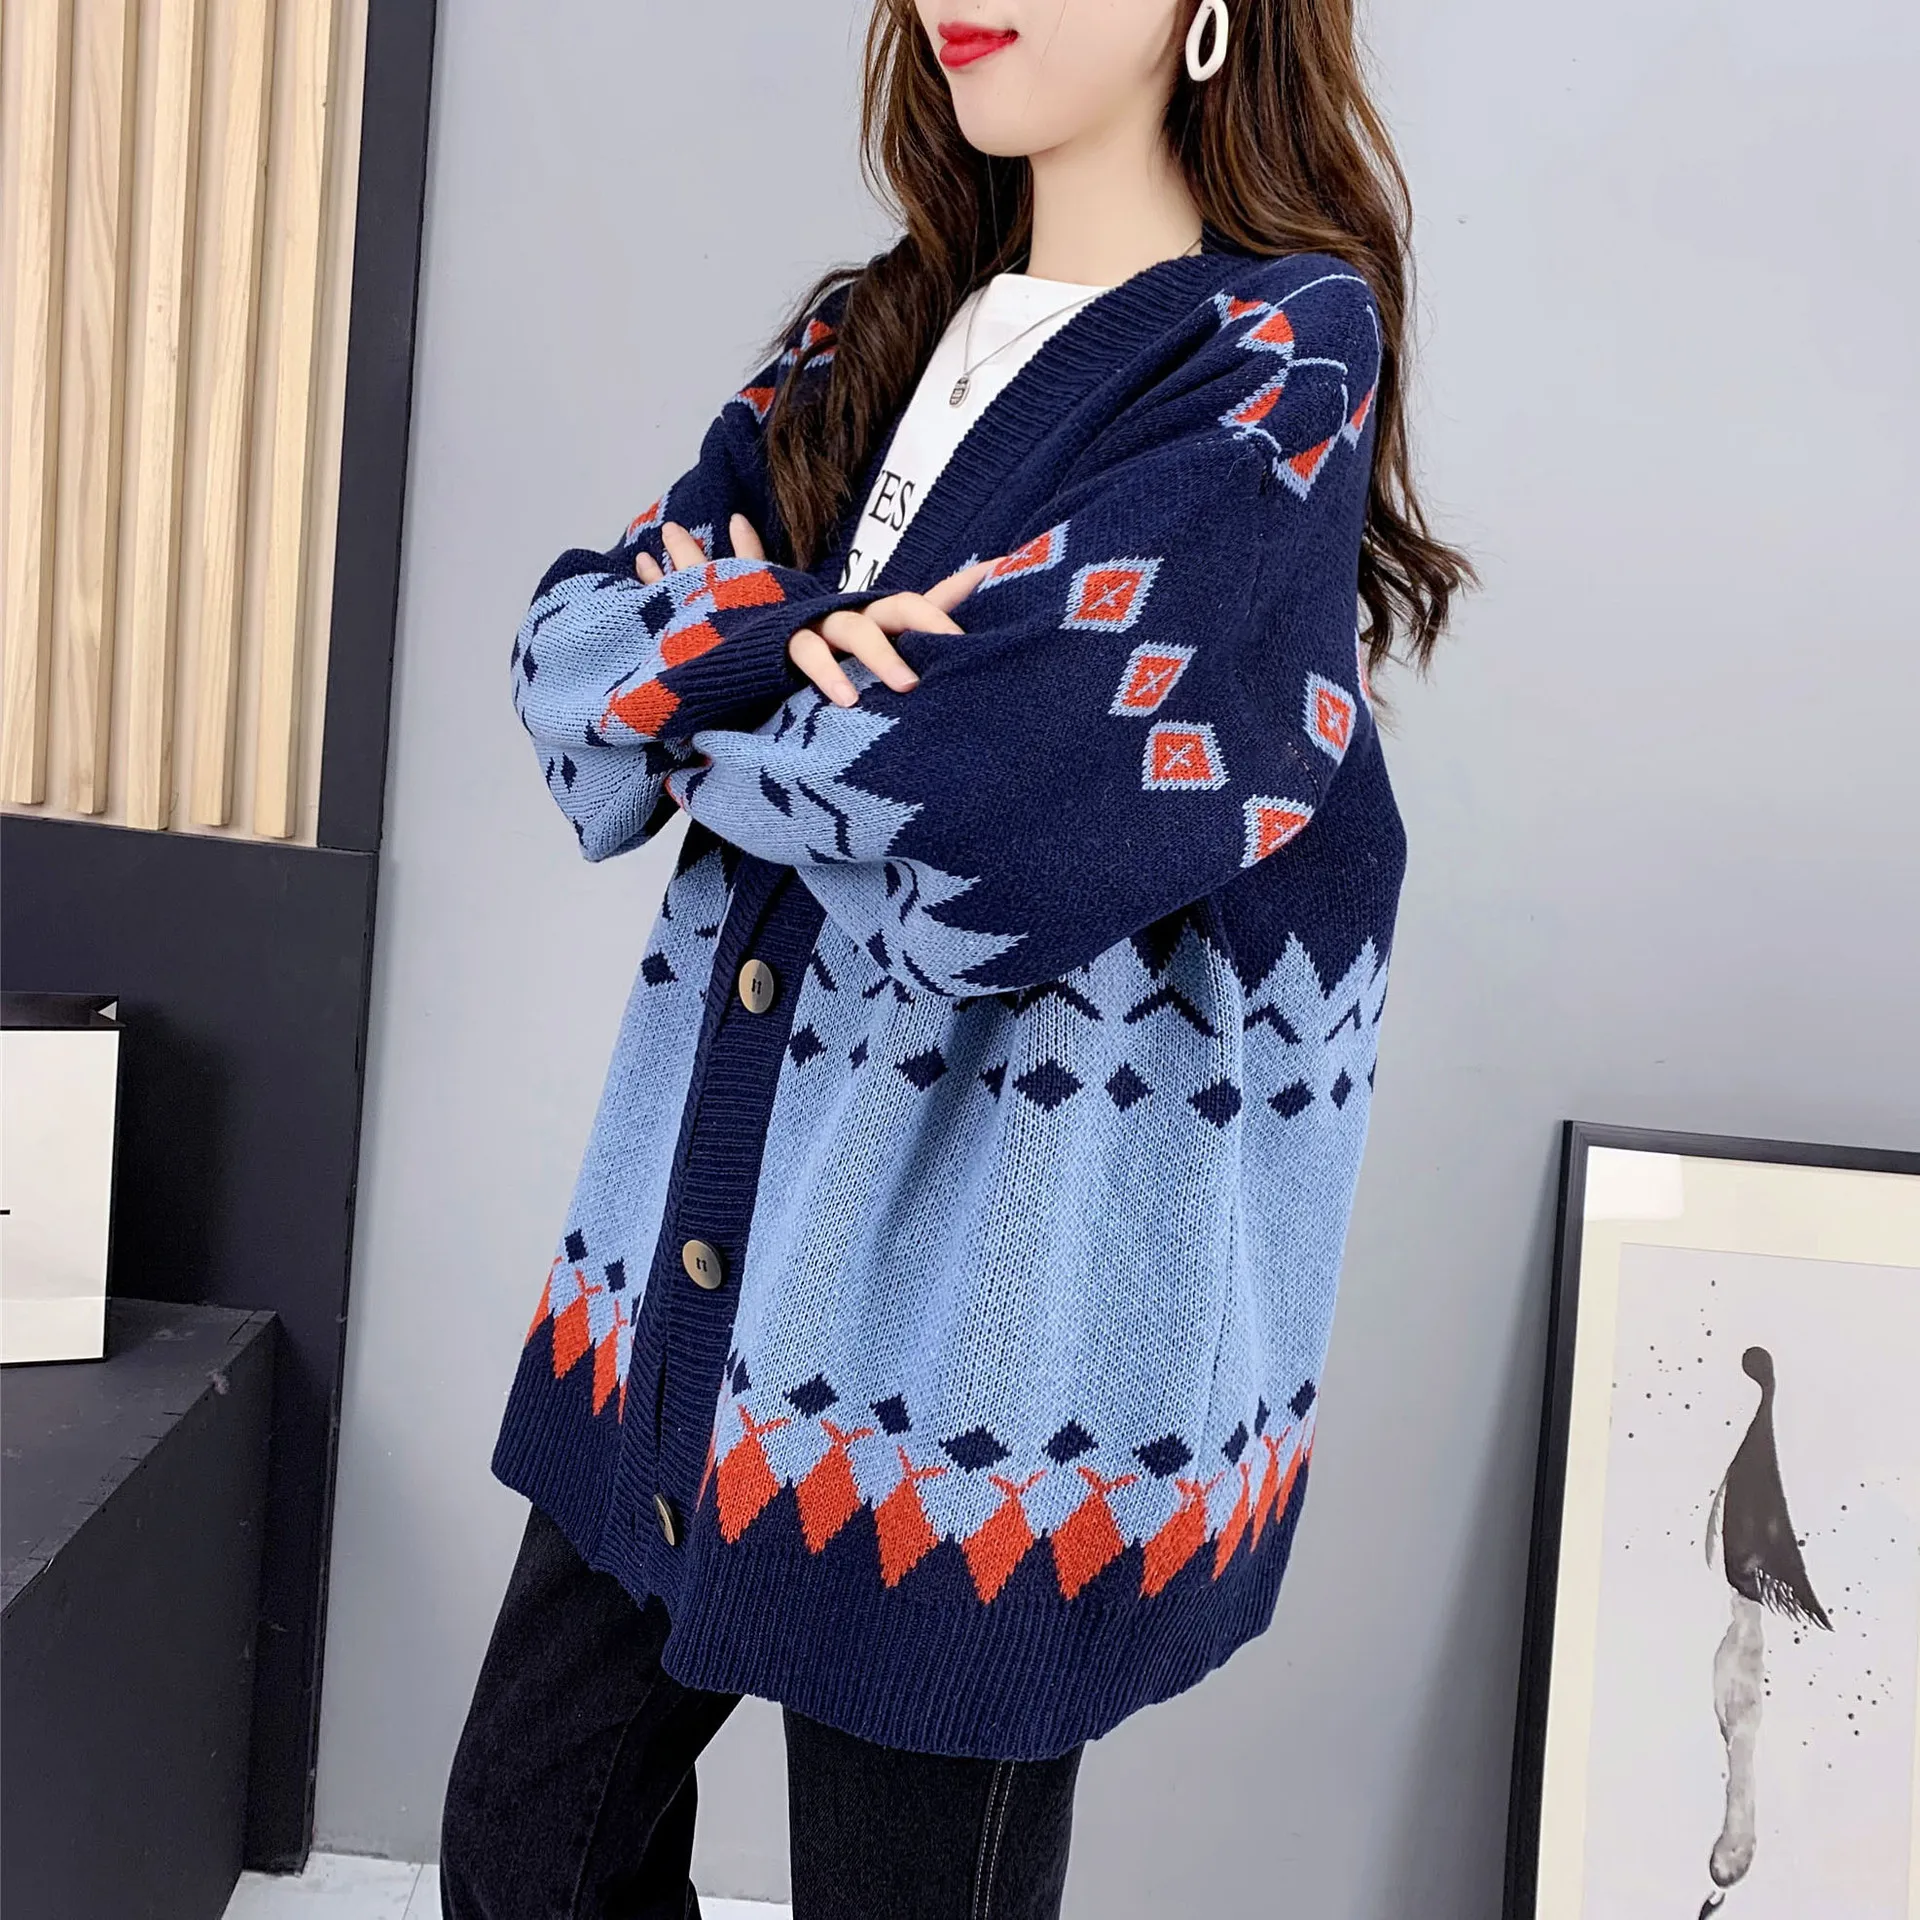 Women's sweater cardigan 2021 new casual V-Neck long sleeve loose retro jacquard button knitted top winter women's sweater coat ugly christmas sweater